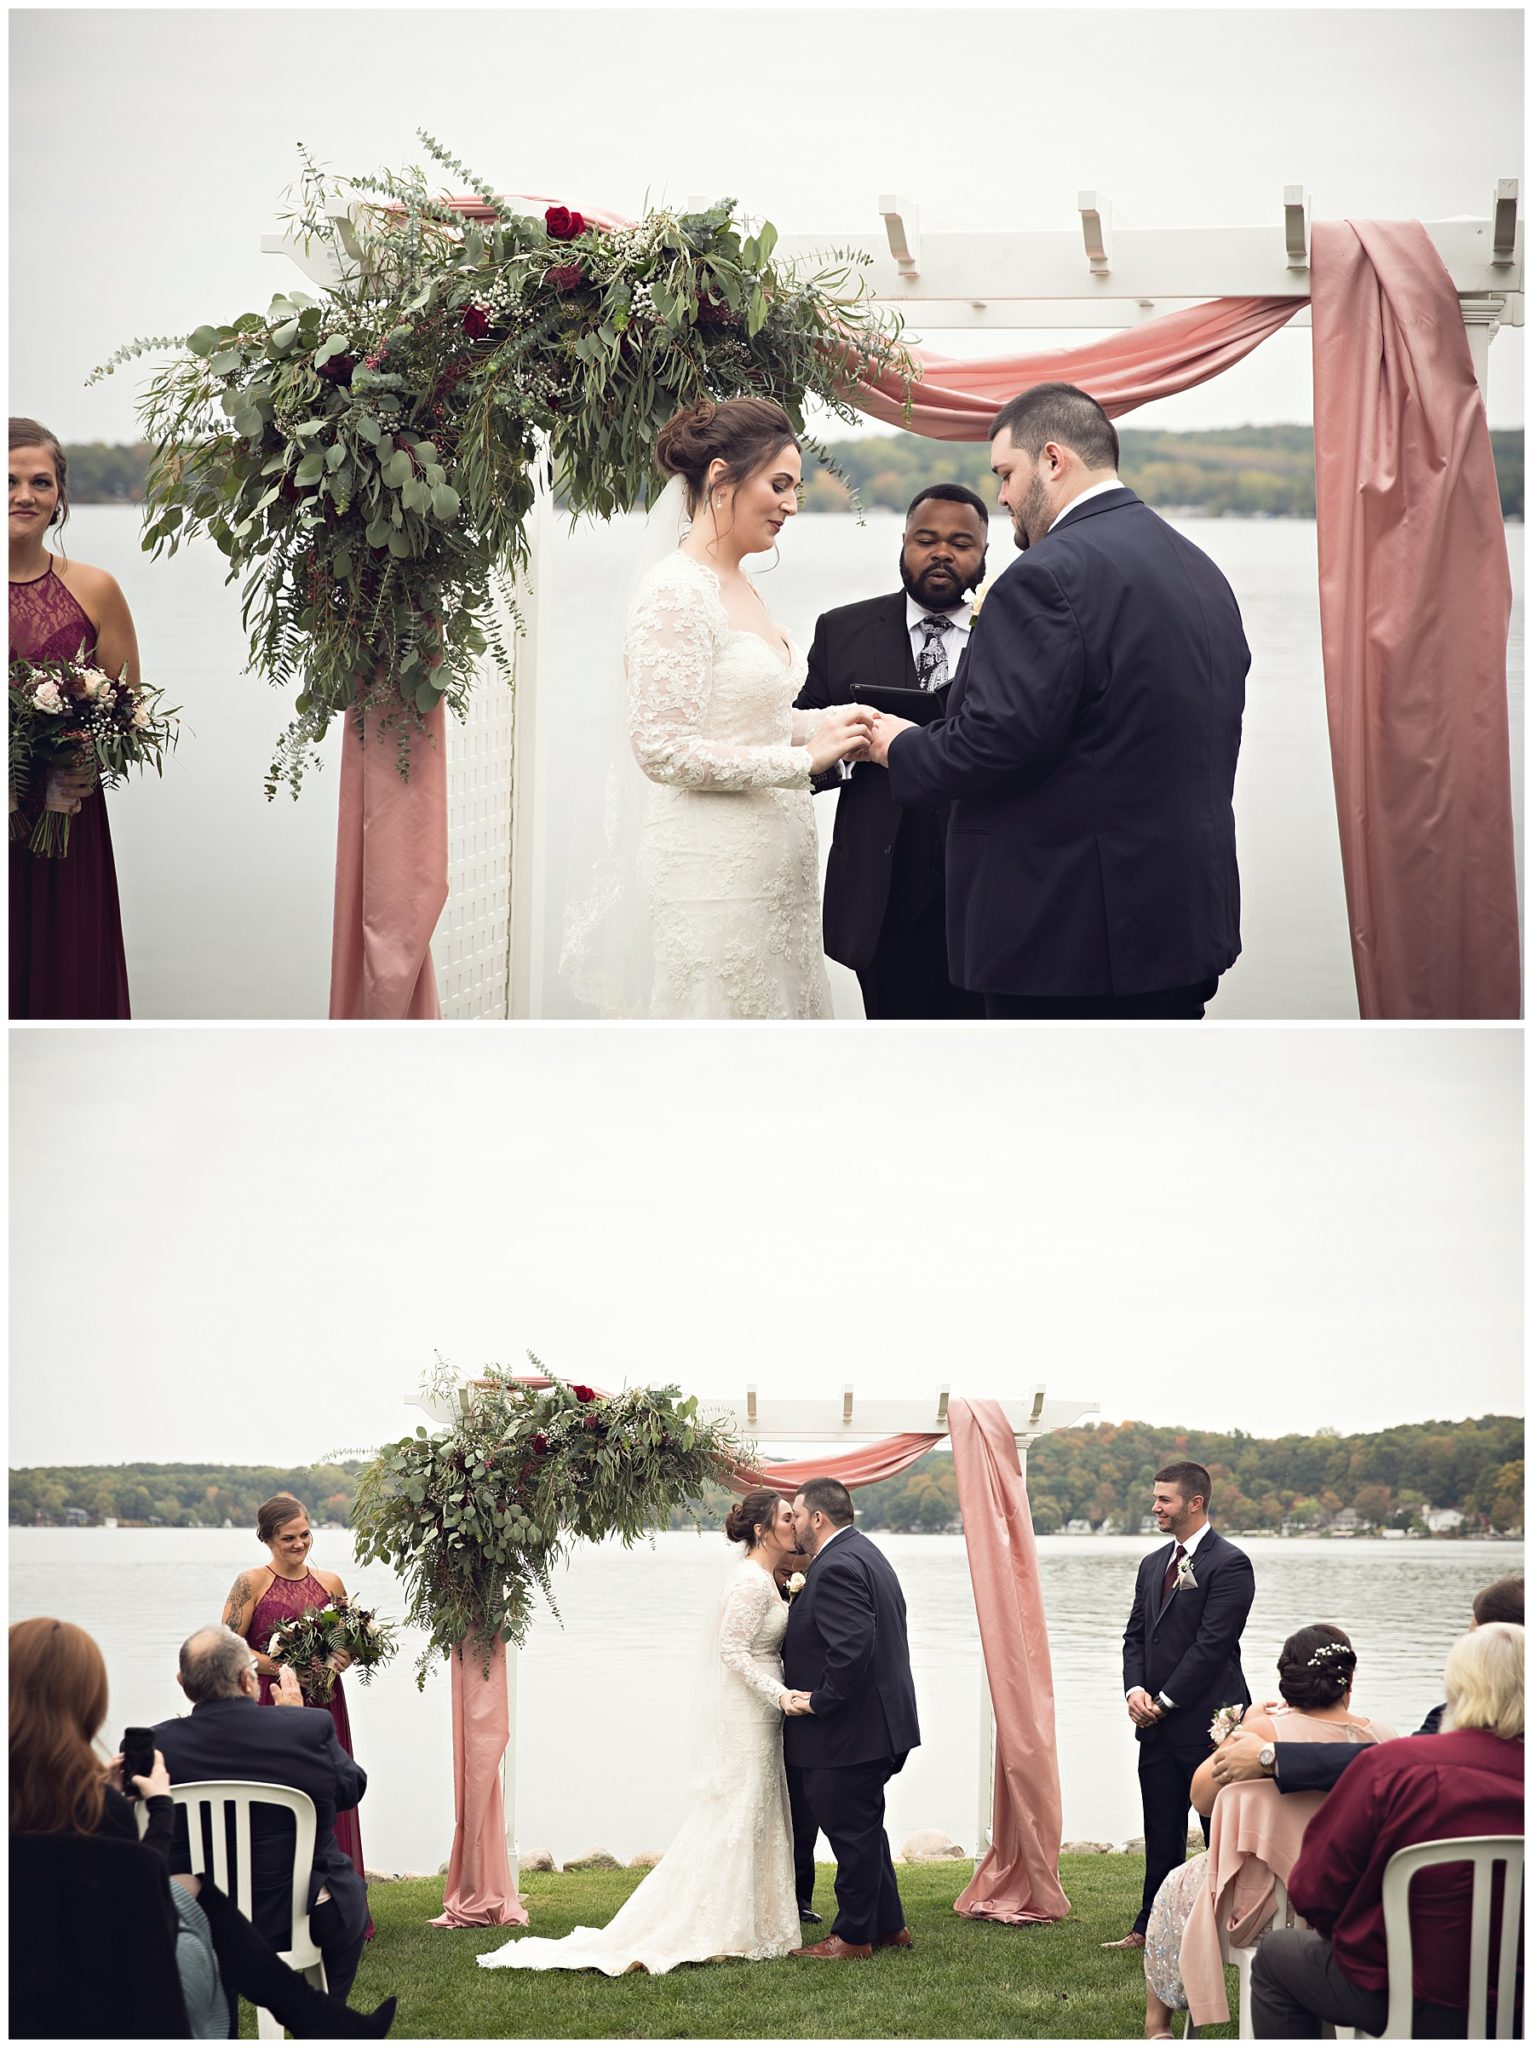 Fall colors October wedding ceremony at Bay Pointe Inn on Gun Lake photographed by Melissa Gregersen Photography